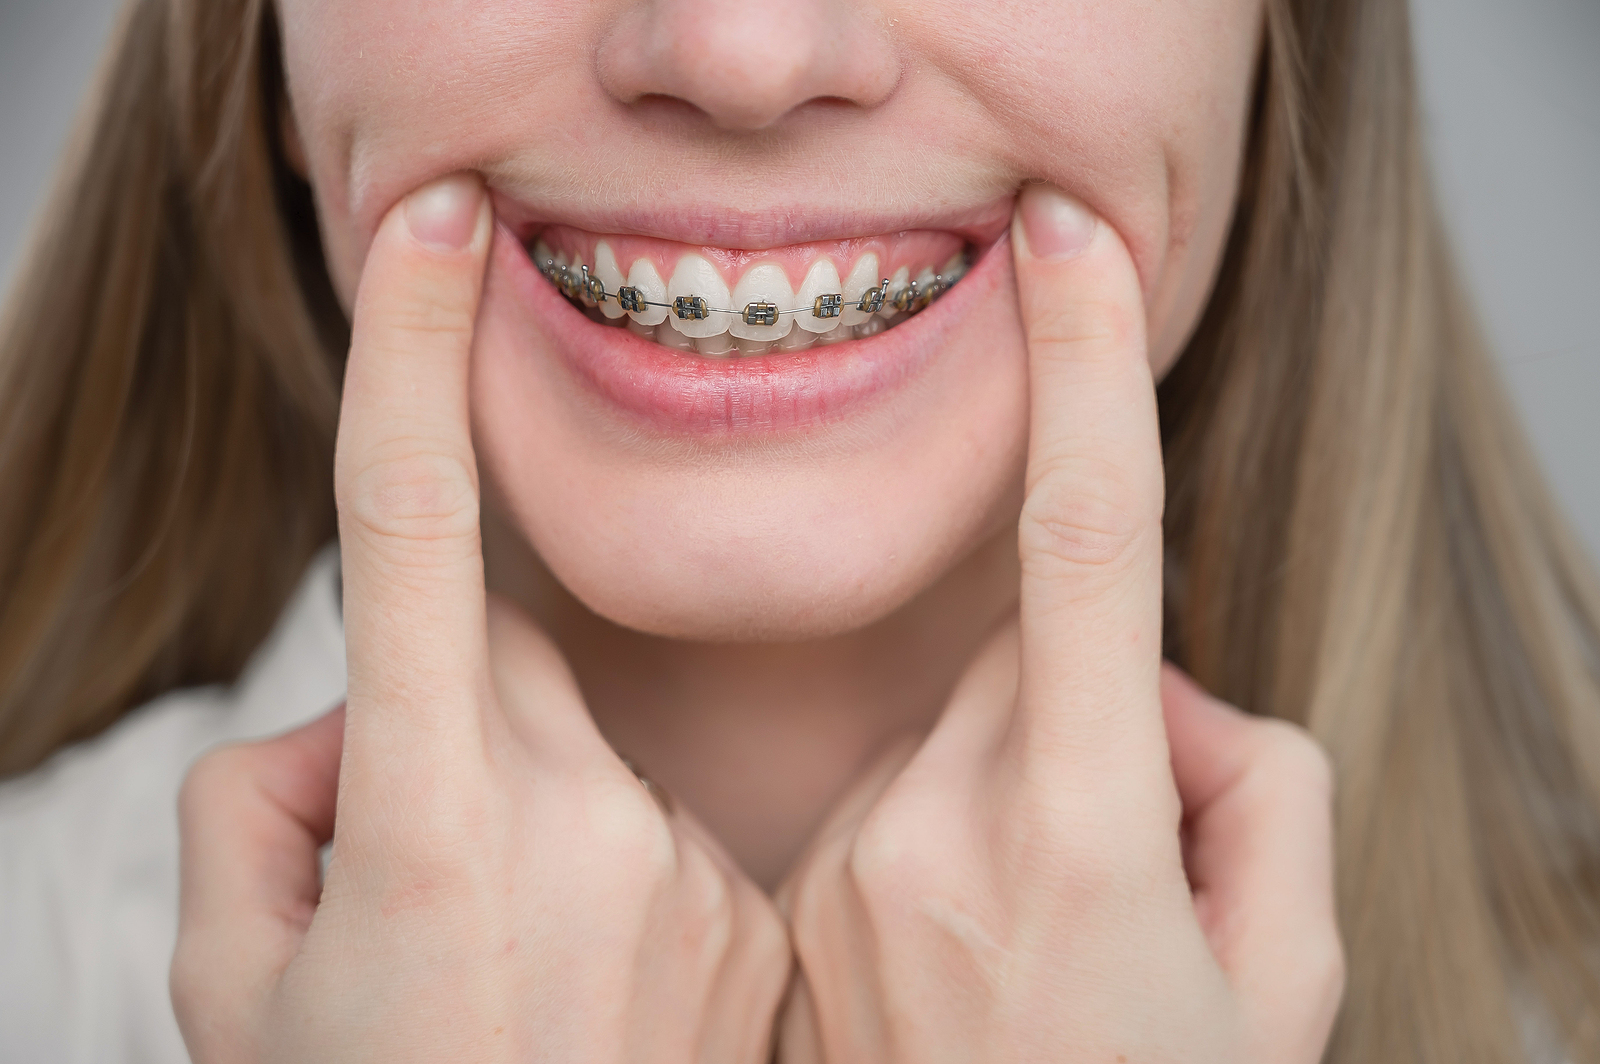 Metal, Clear and Ceramic Braces. What's the Difference?